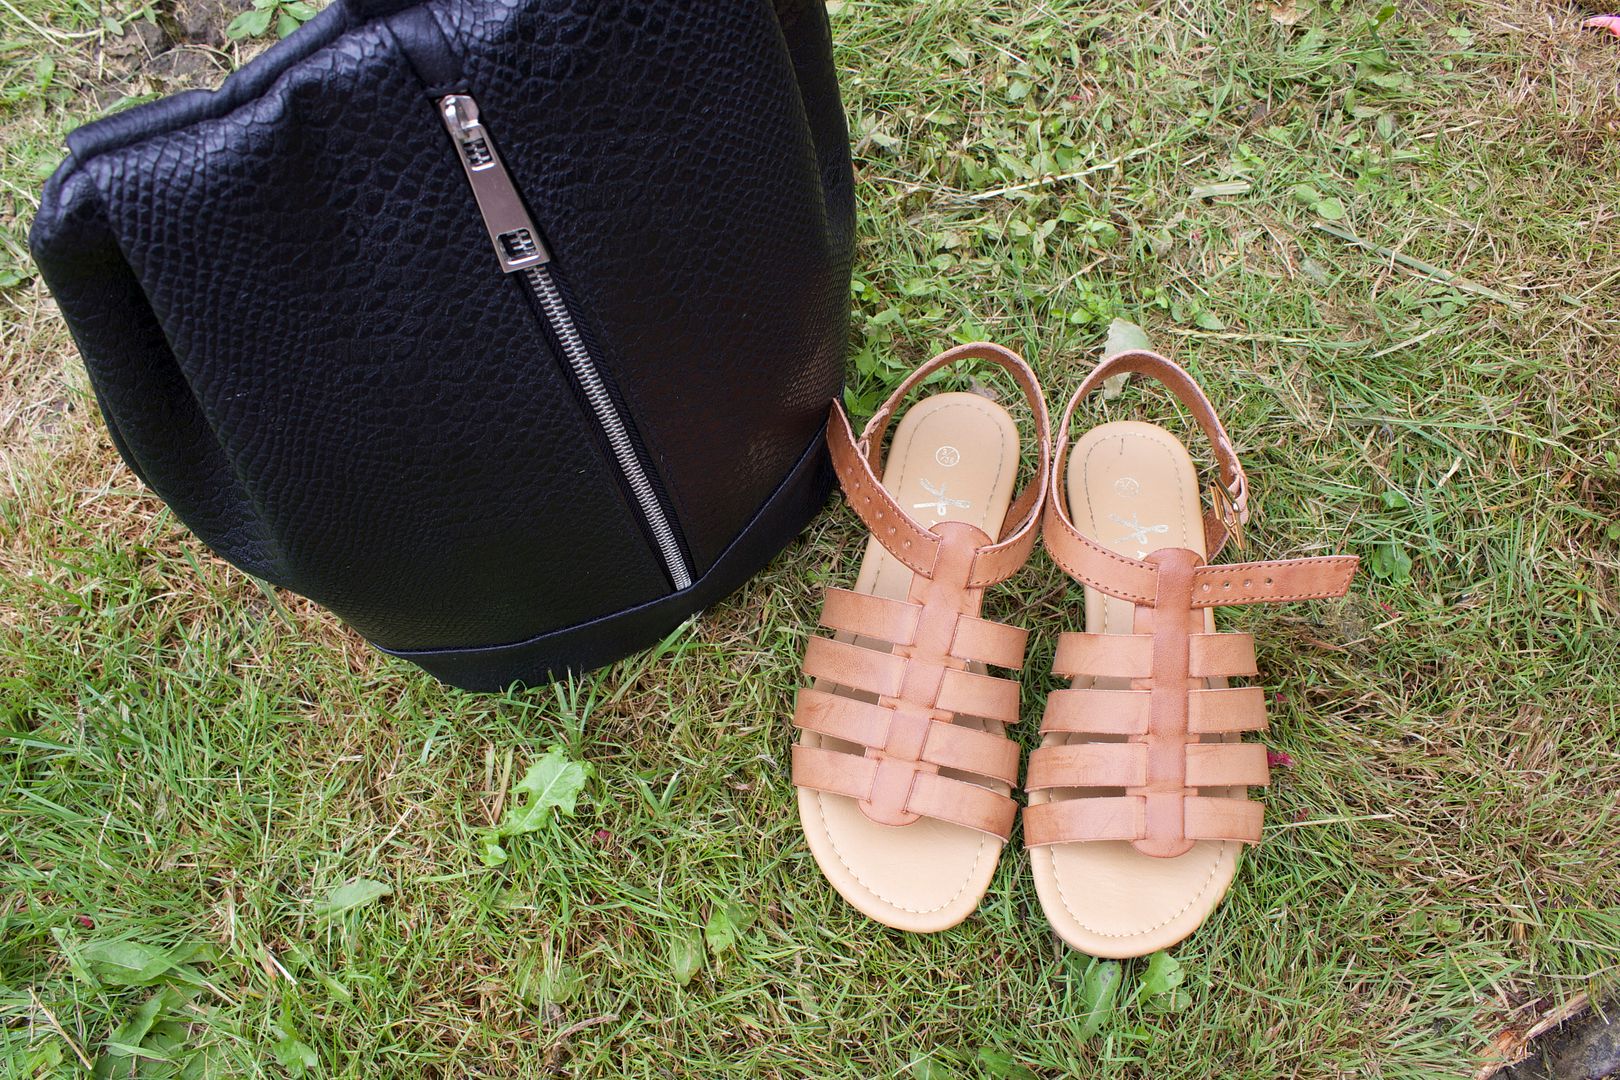 Primark Backpack and Sandals